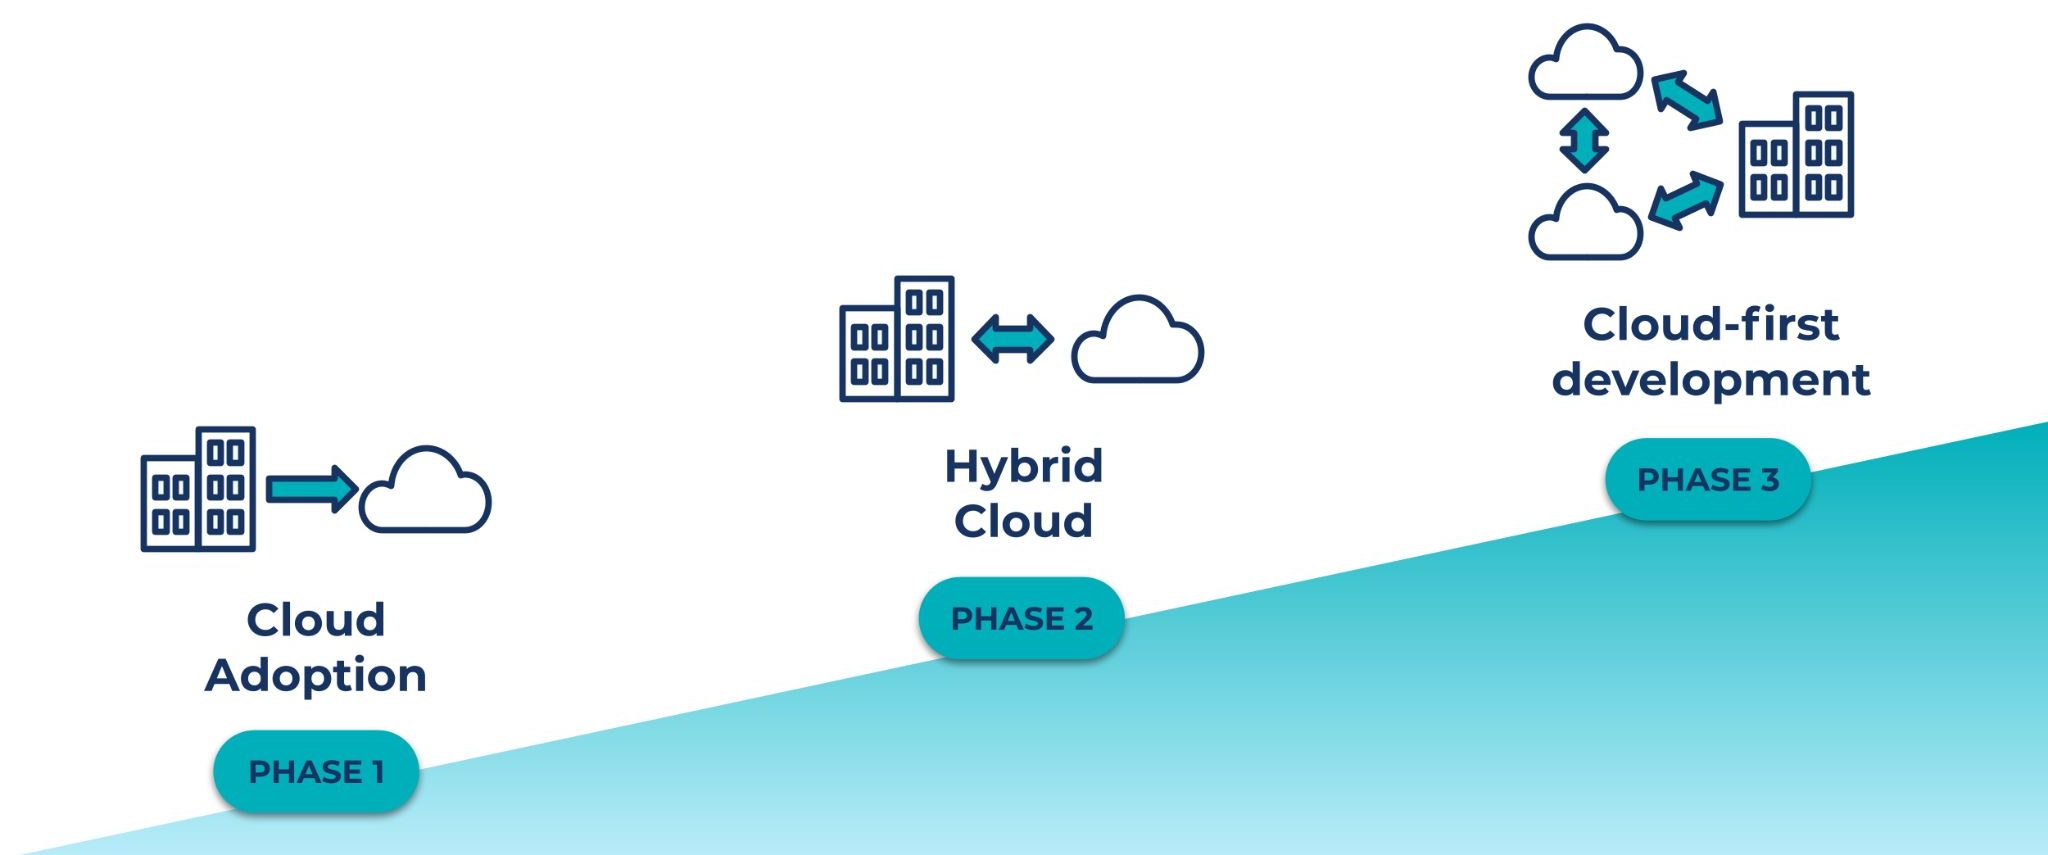 Cloud adoption phases